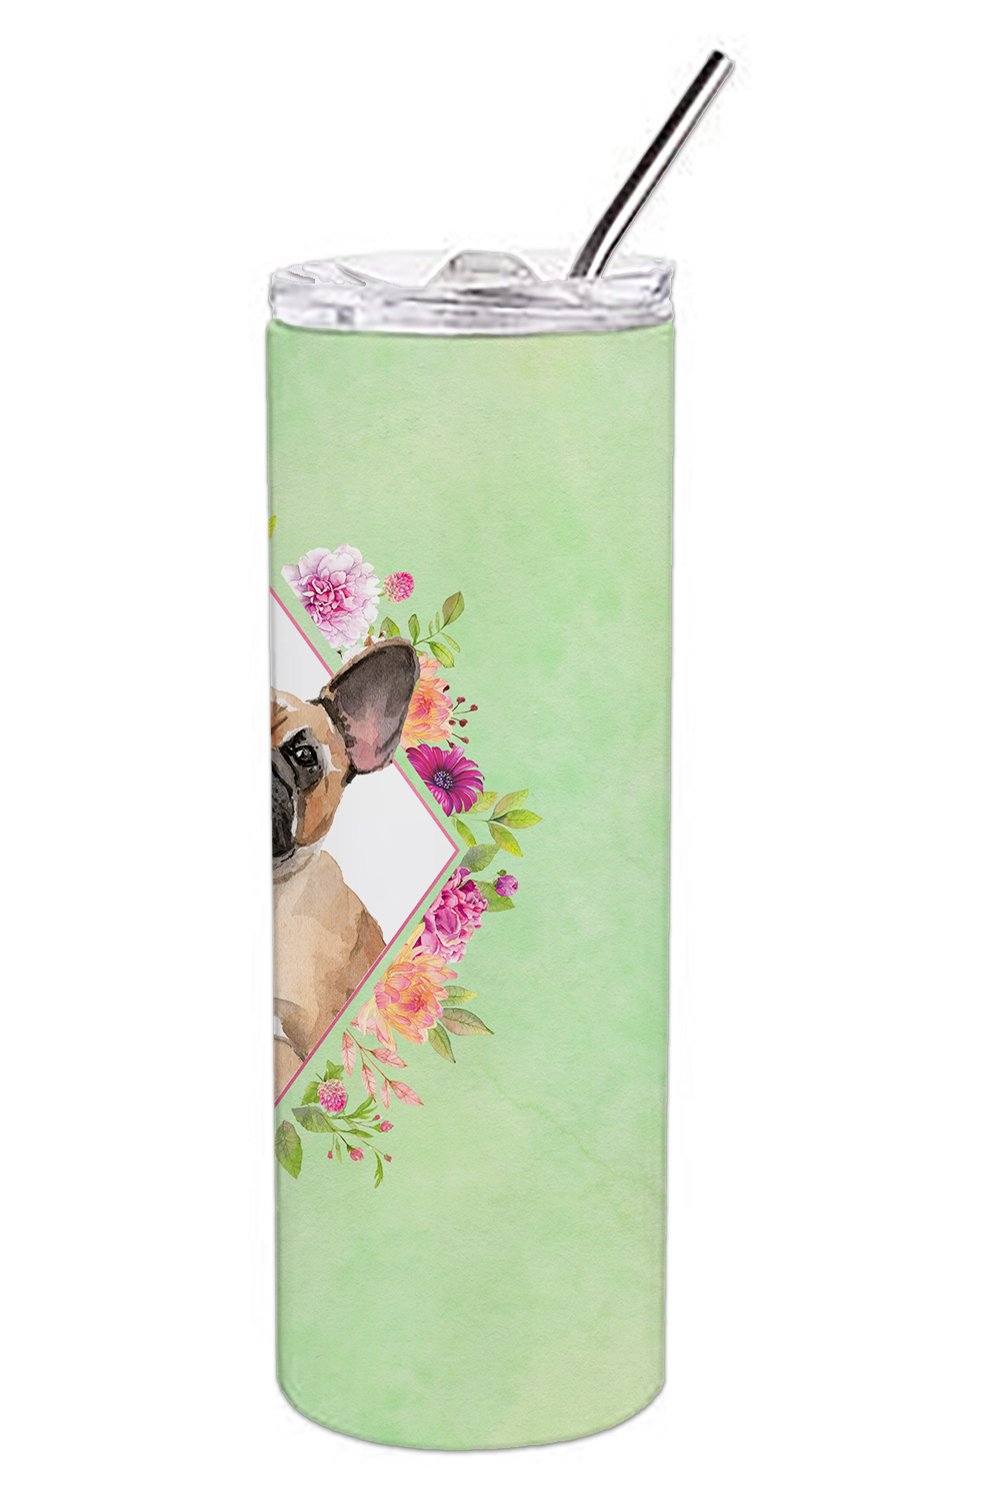 Fawn French Bulldog Green Flowers Double Walled Stainless Steel 20 oz Skinny Tumbler CK4398TBL20 by Caroline's Treasures